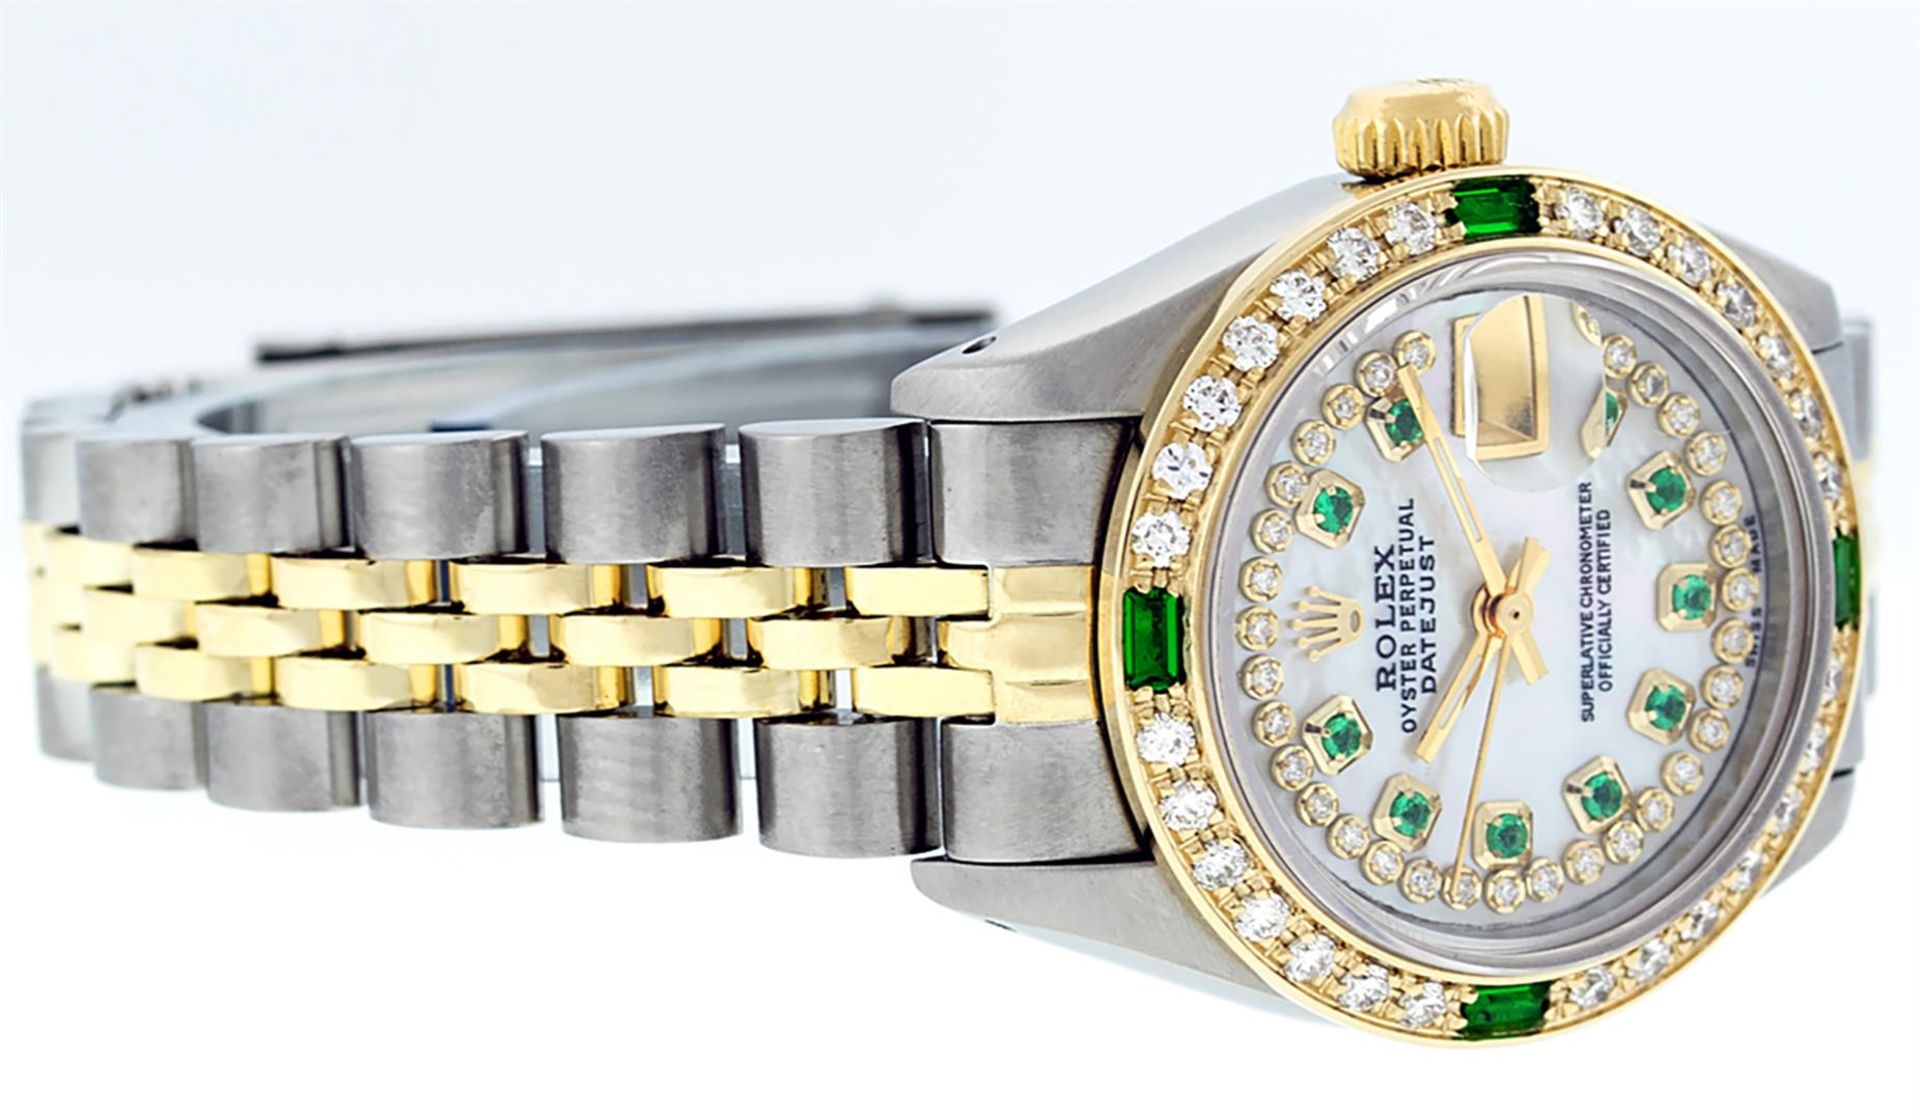 Rolex Ladies 2 Tone MOP Diamond & Emerald Datejust Oyster Perpetual Wristwatch - Image 4 of 9